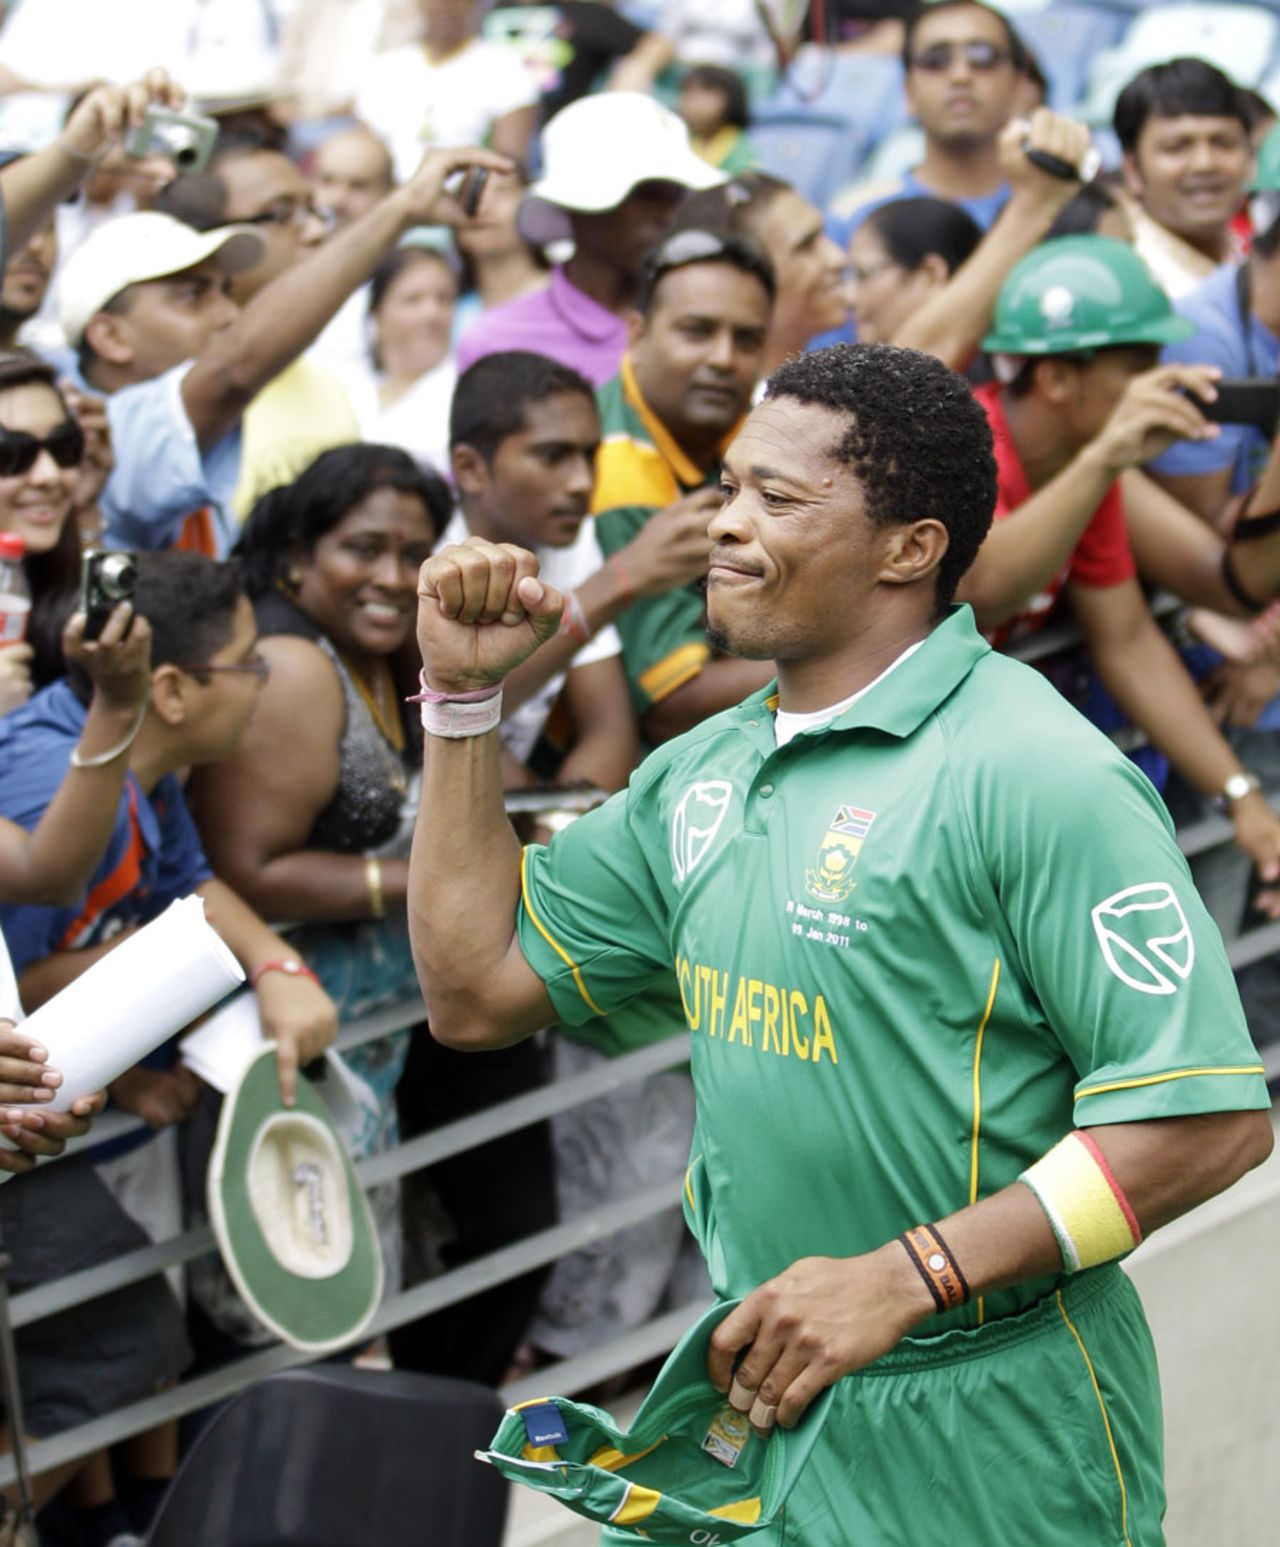 Makhaya Ntini walks on to the field for his last international game, South Africa v India, only Twenty20, Durban